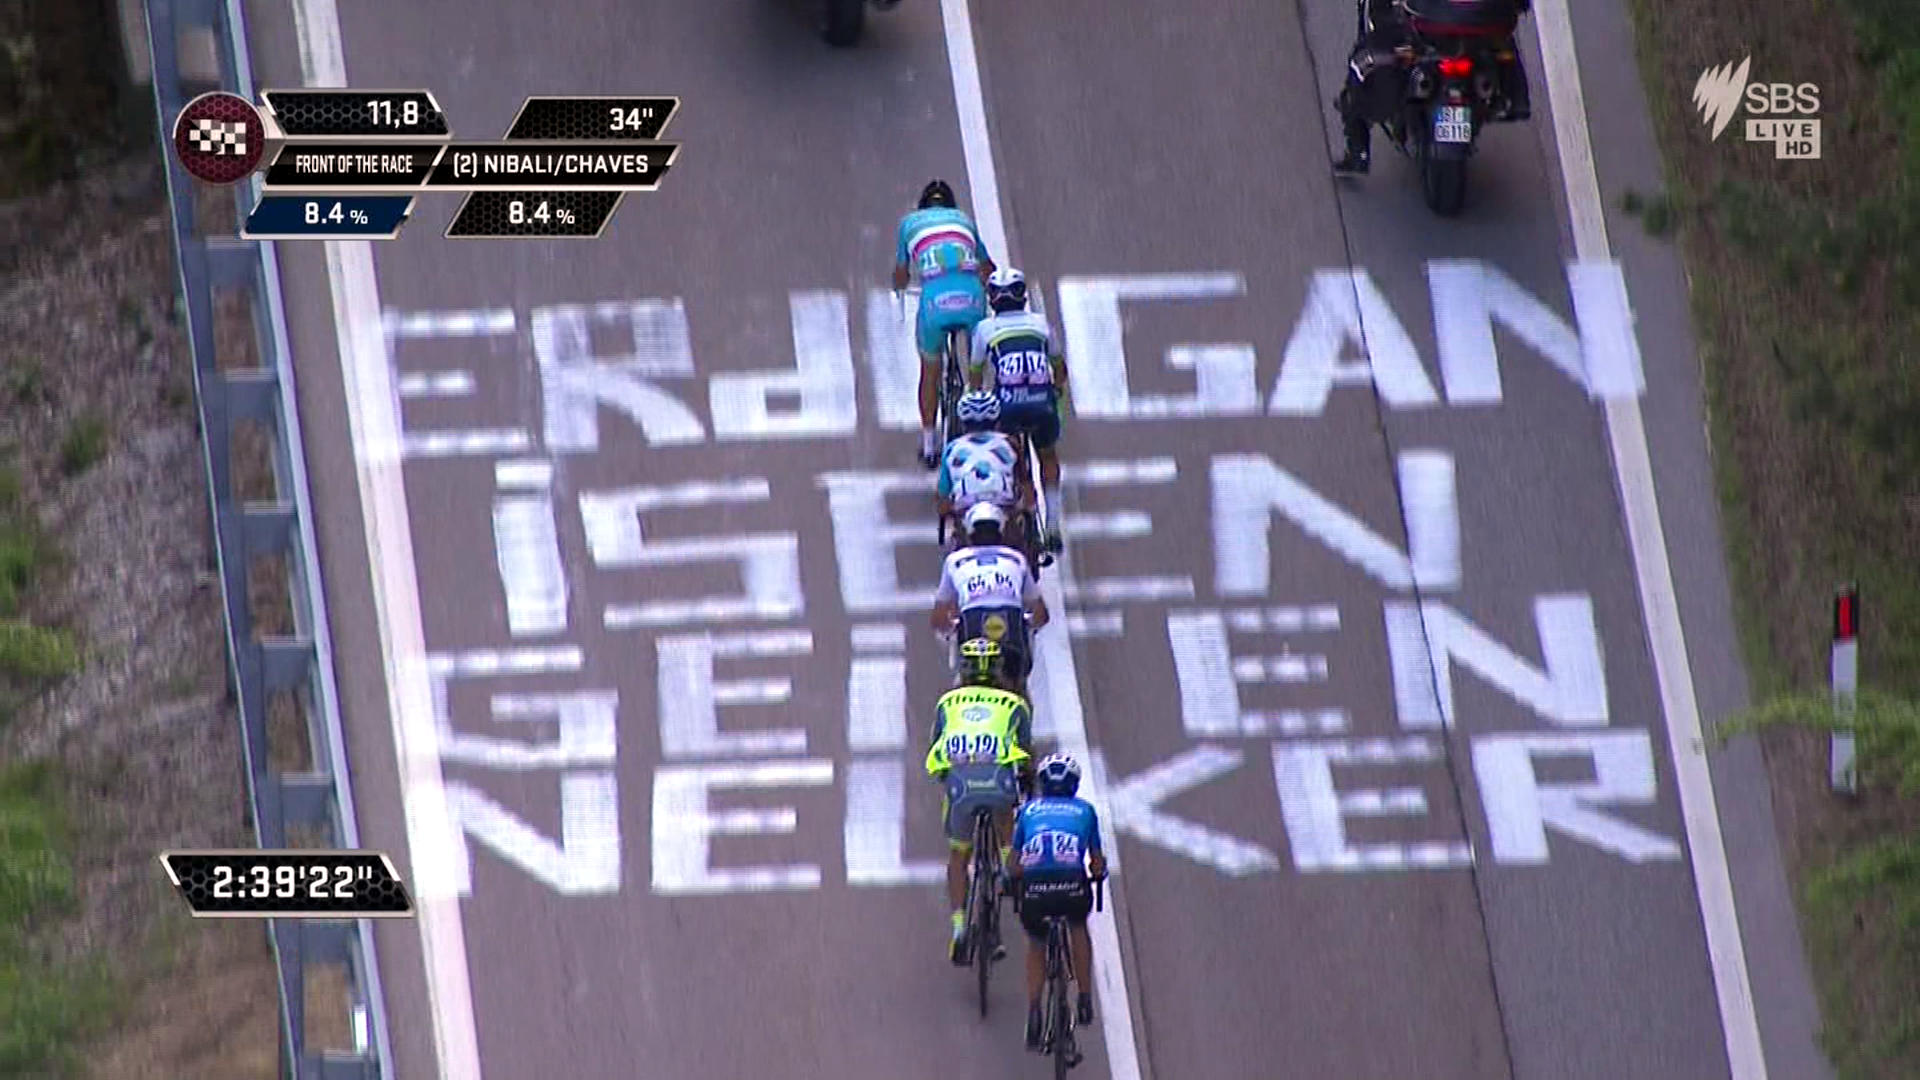 Riders in the Giro d'Italia pass over slogan on the road.